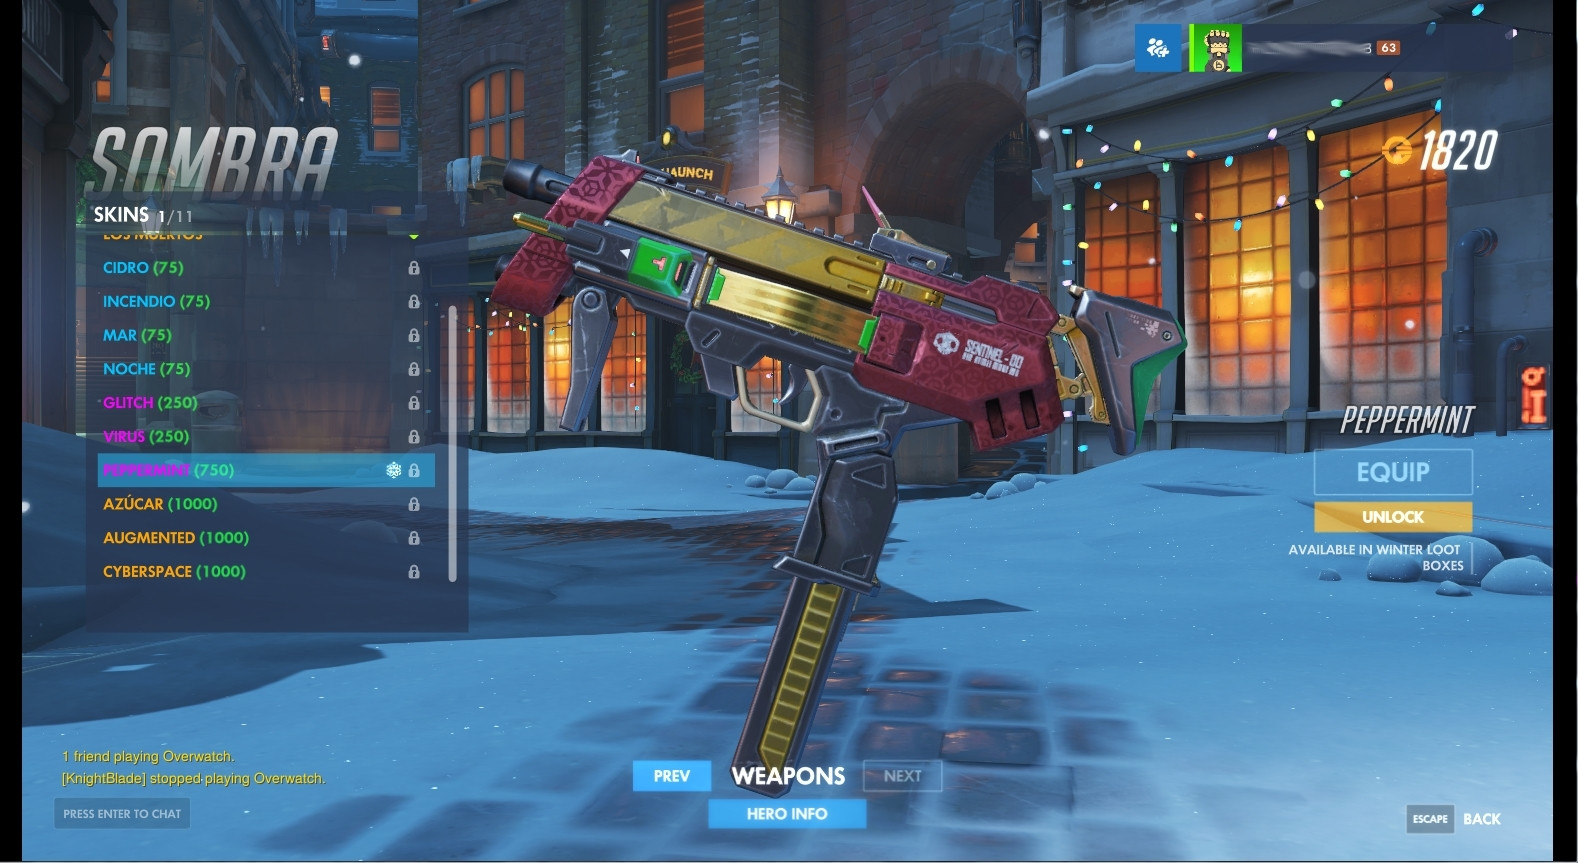 Sombra (Peppermint) Weapon